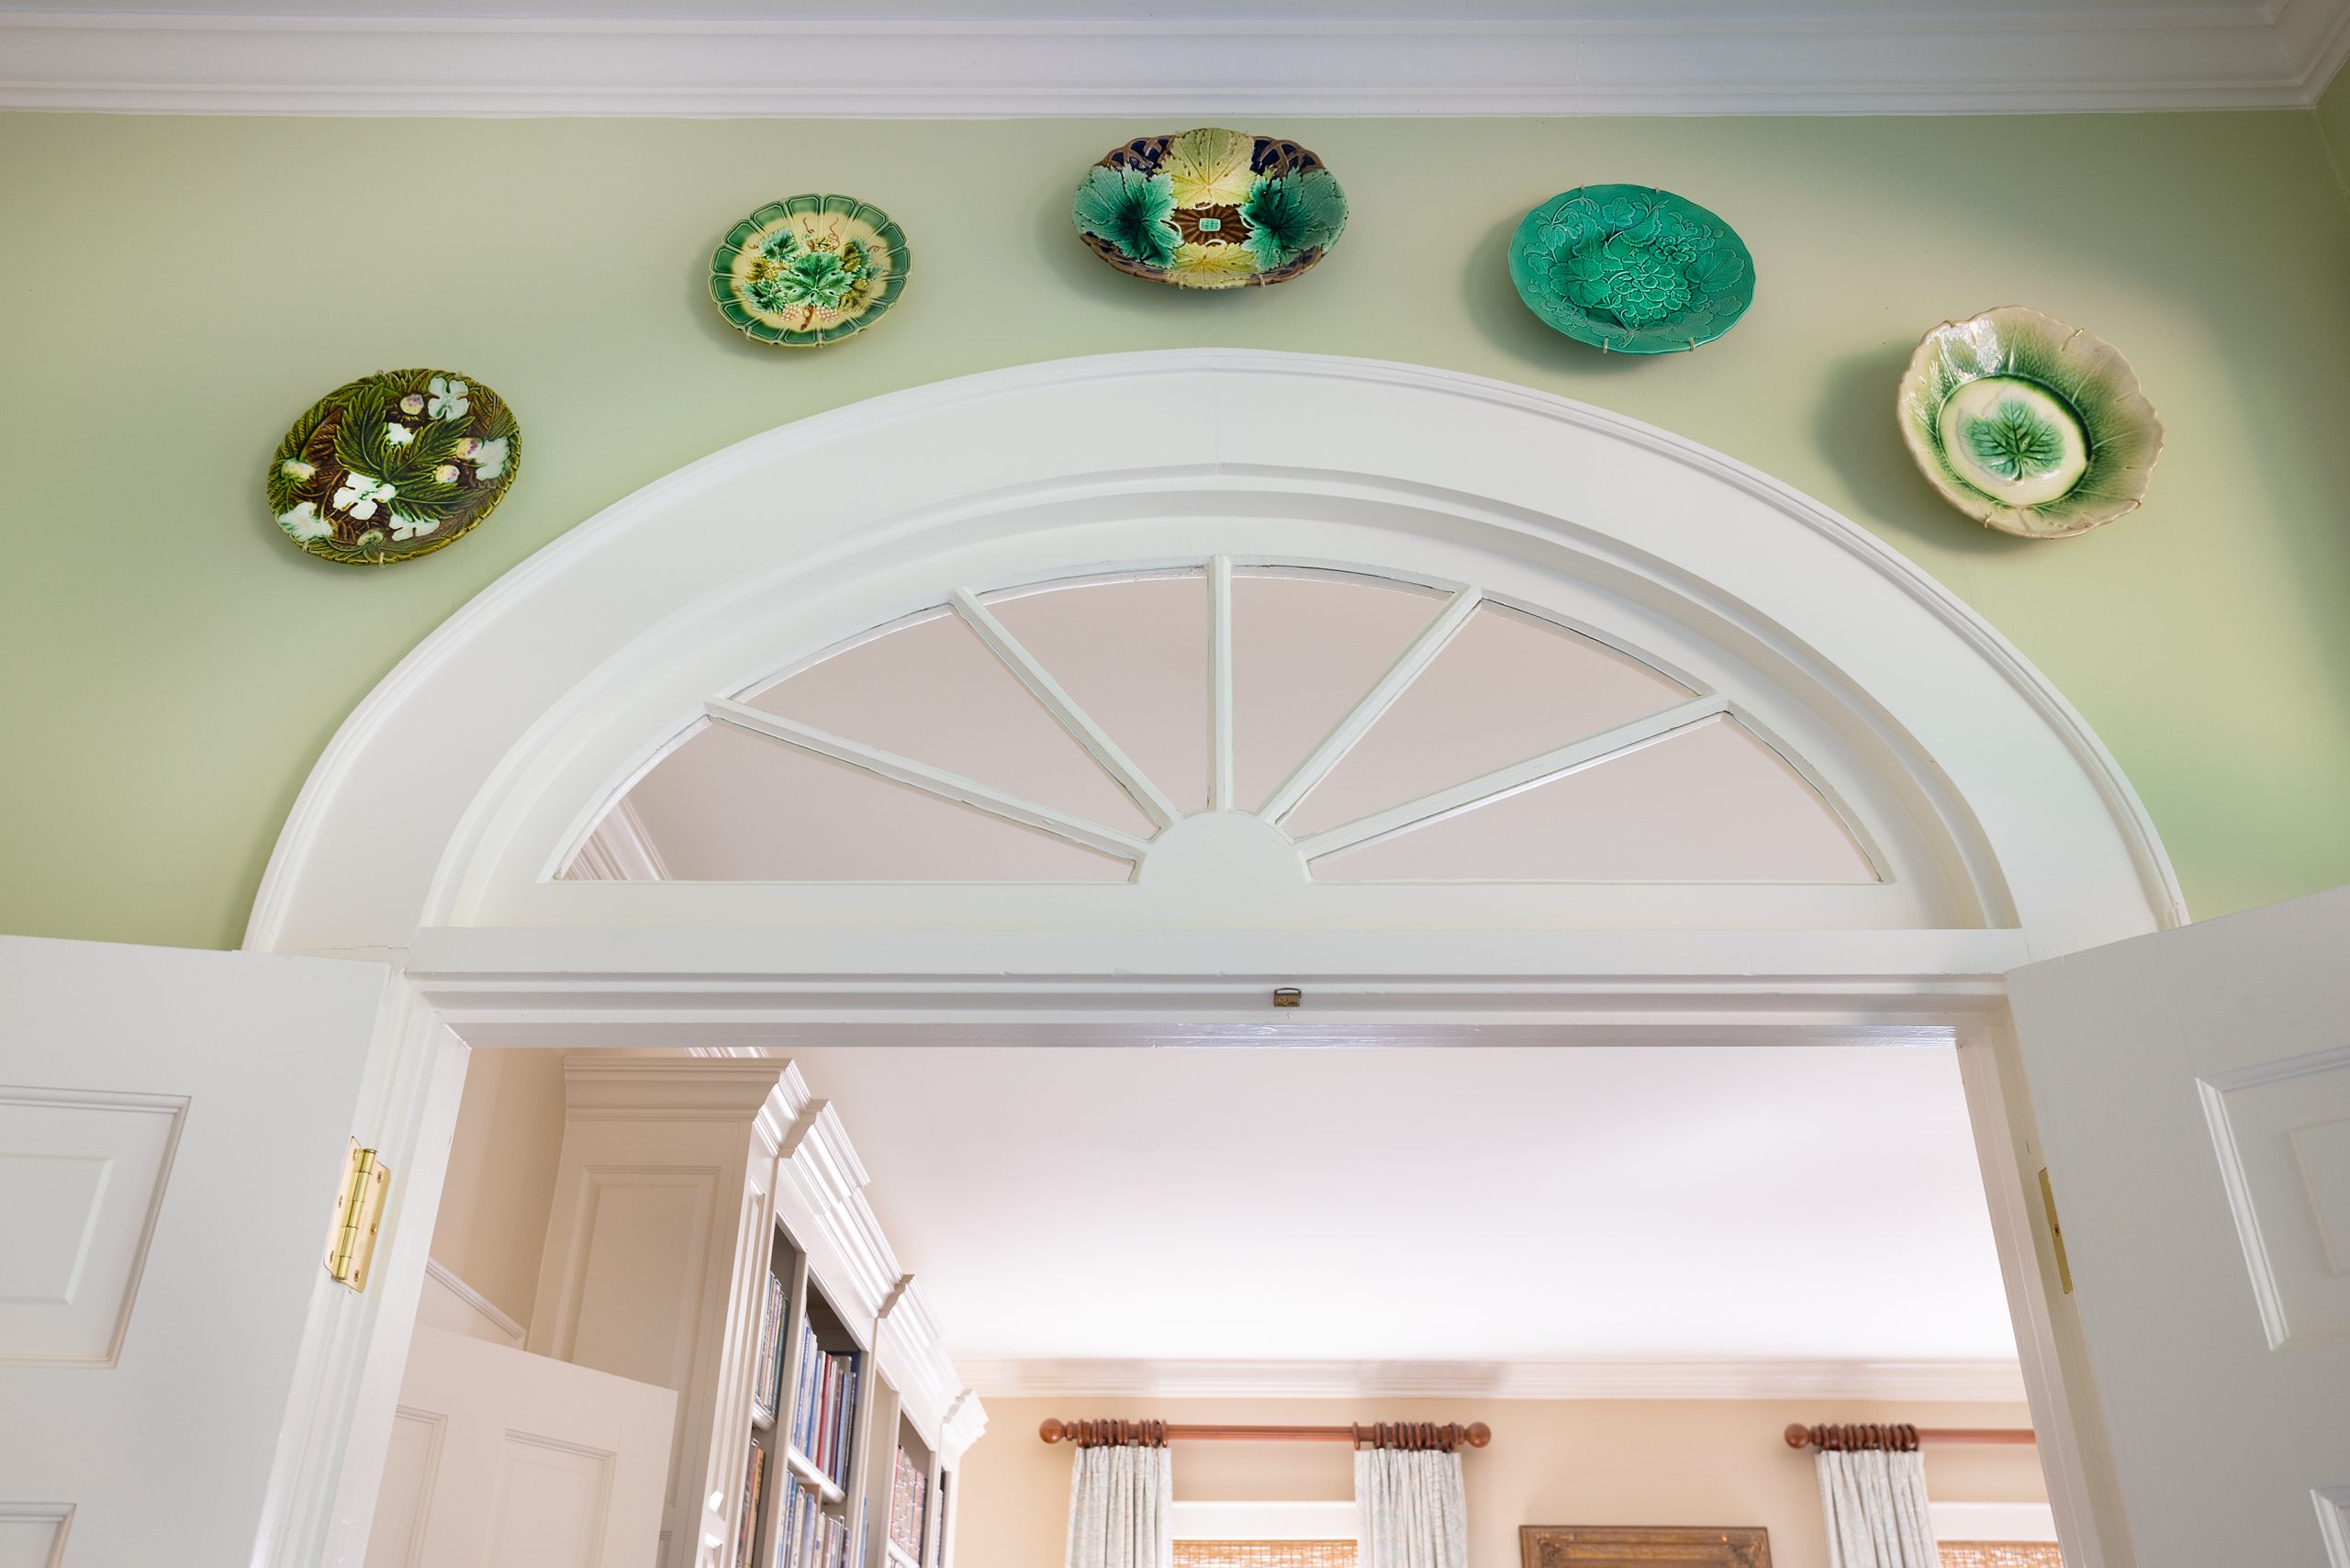 A collection of majolica plates hangs in the sunroom over attractive French doors, a detail that reflects Jill’s love of collecting antiques.